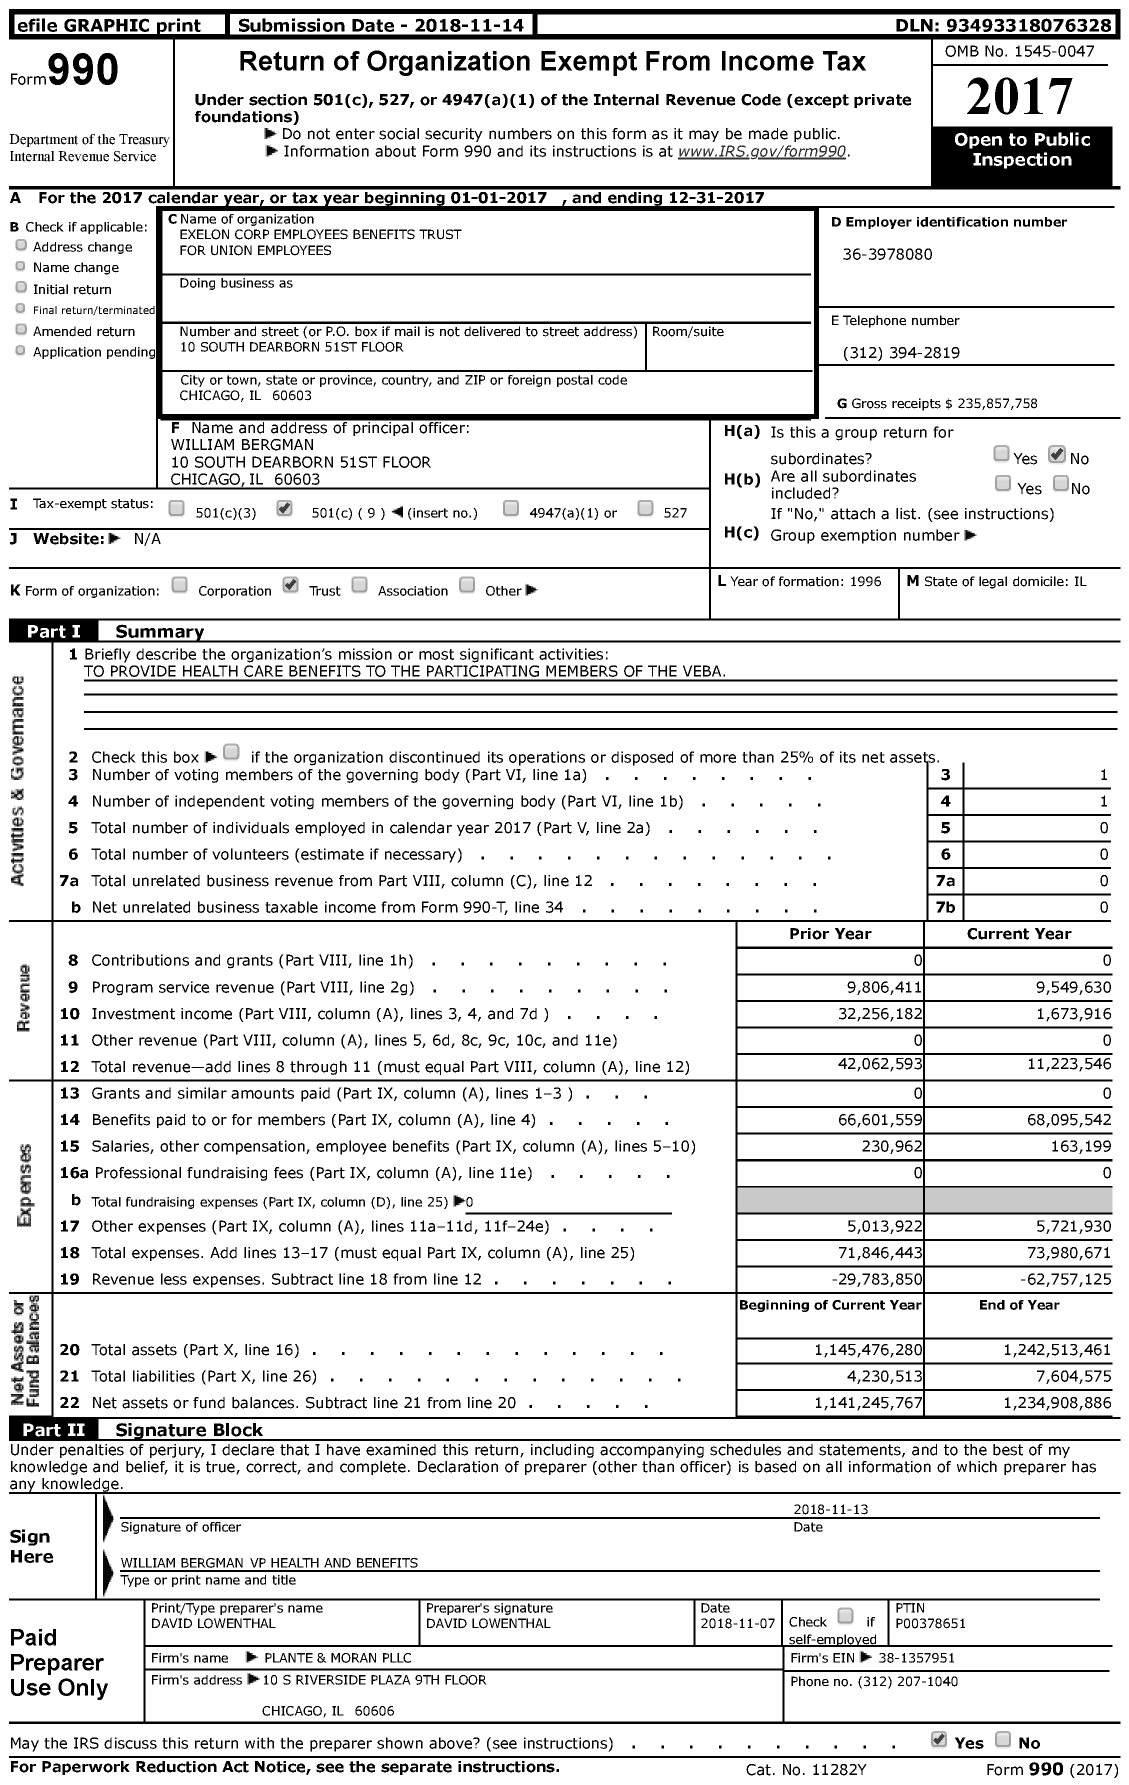 Image of first page of 2017 Form 990 for Exelon Corp Employees Benefits Trust for Union Employees